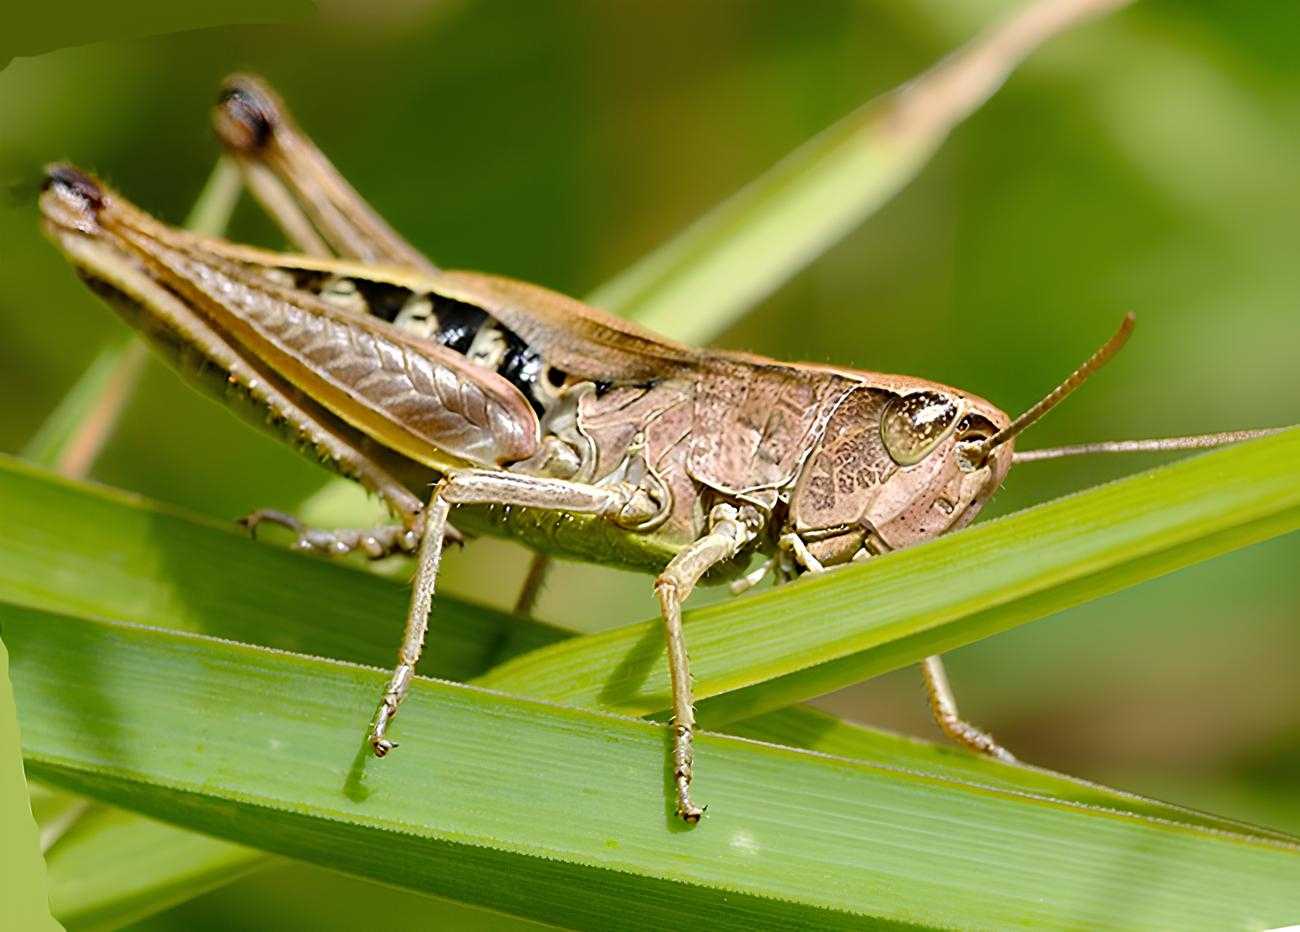 Crickets are orthopteran insects which are related to bush crickets, and, more distantly, to grasshoppers.